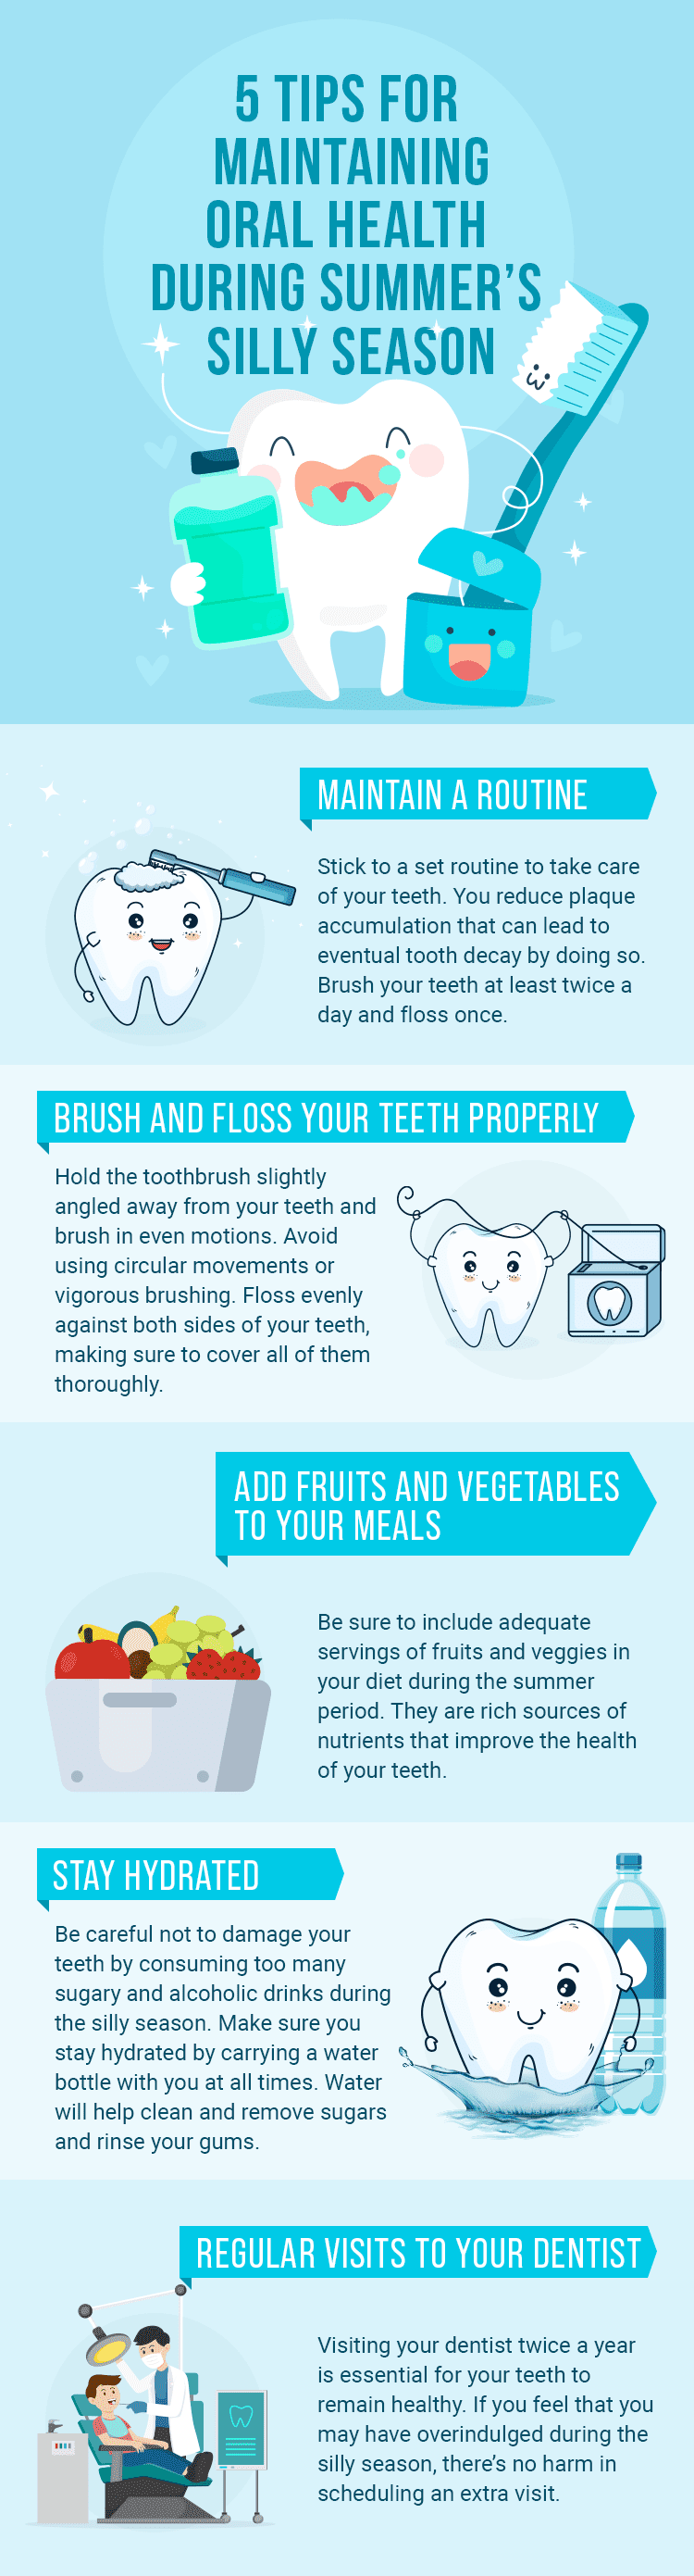 Oral-Health-During-Summer’s-Silly-Season-Infographic